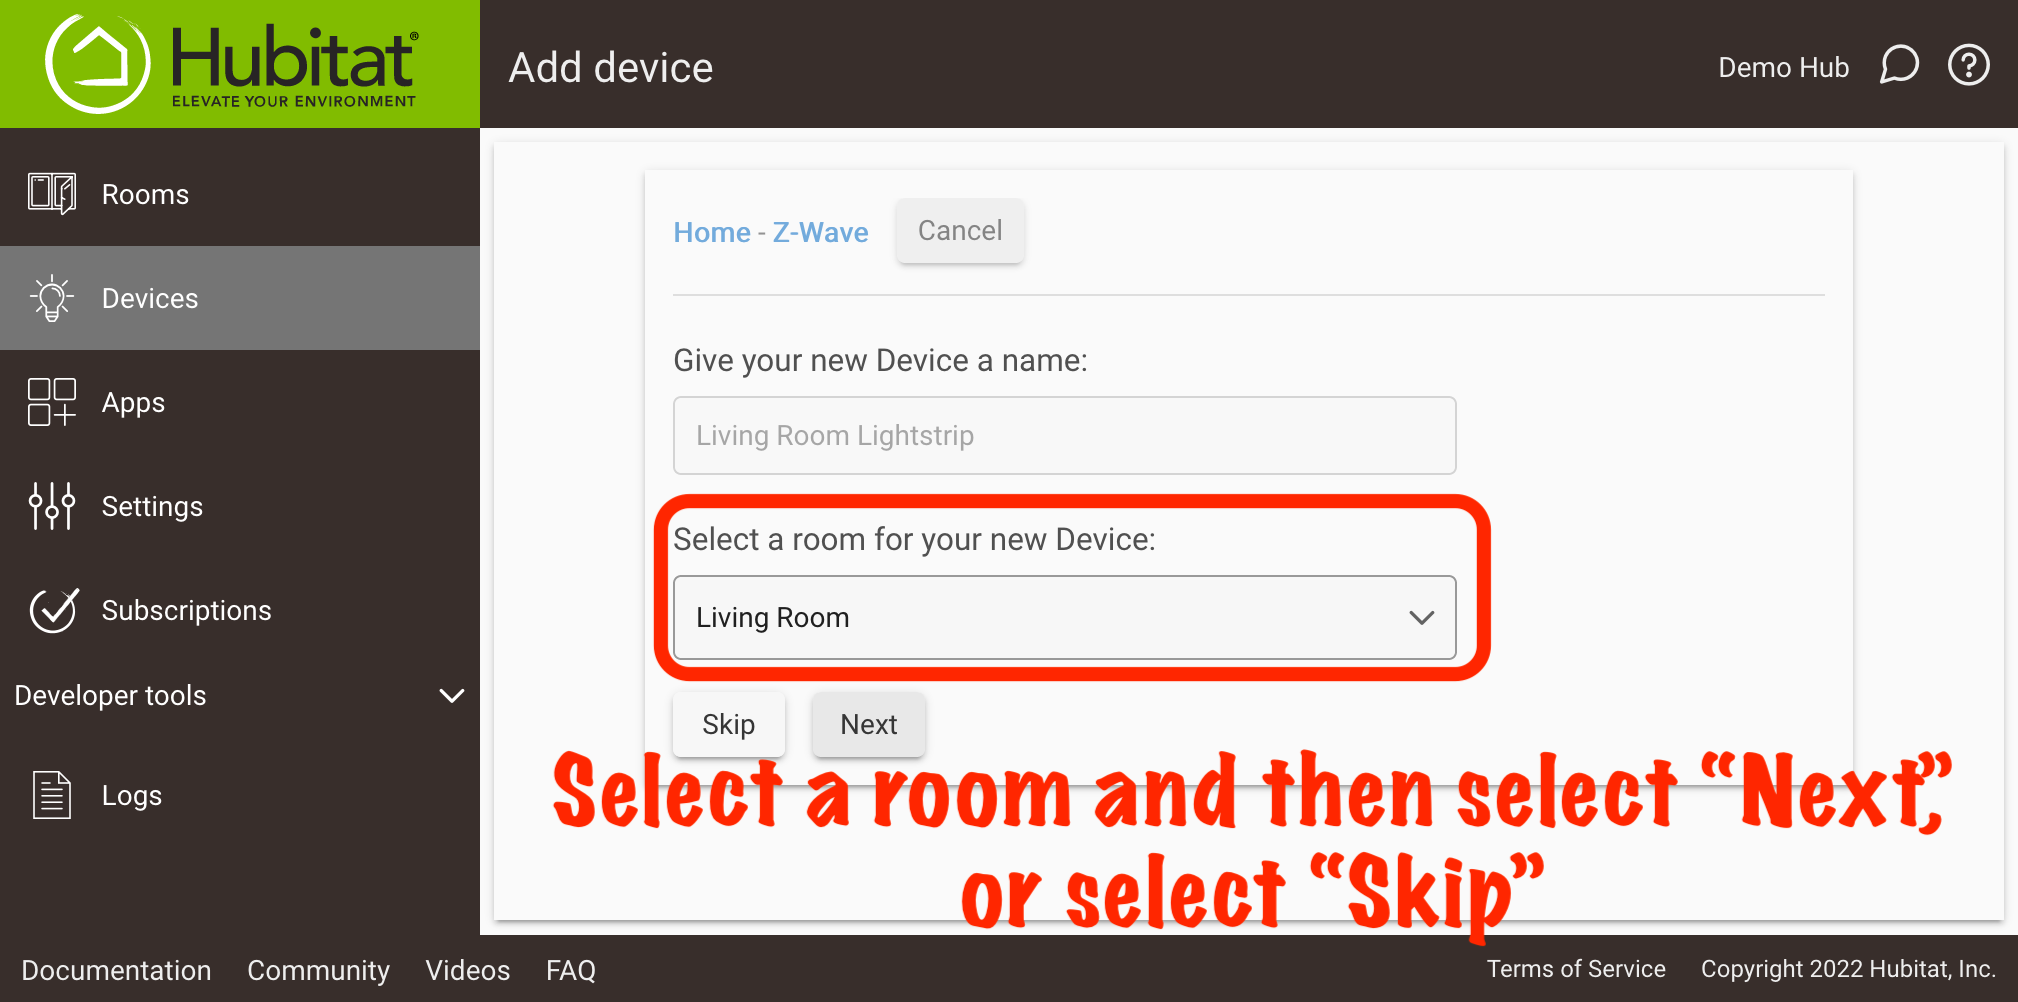 Screenshot: "Select a room" prompt on "Add Device" after adding device